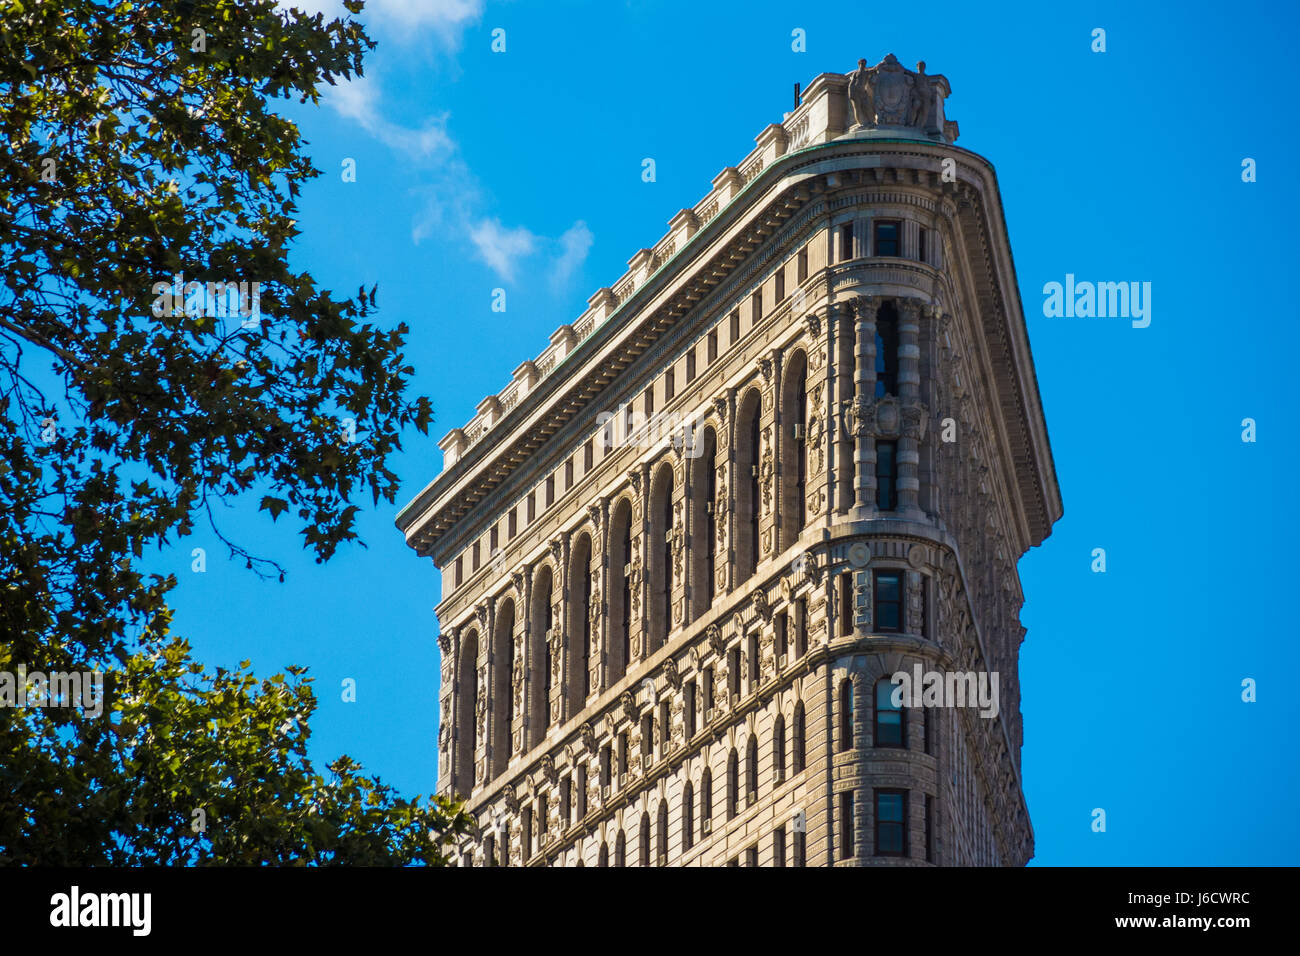 Close up Flat Iron building New York Manhattan stone and steel structure Stock Photo